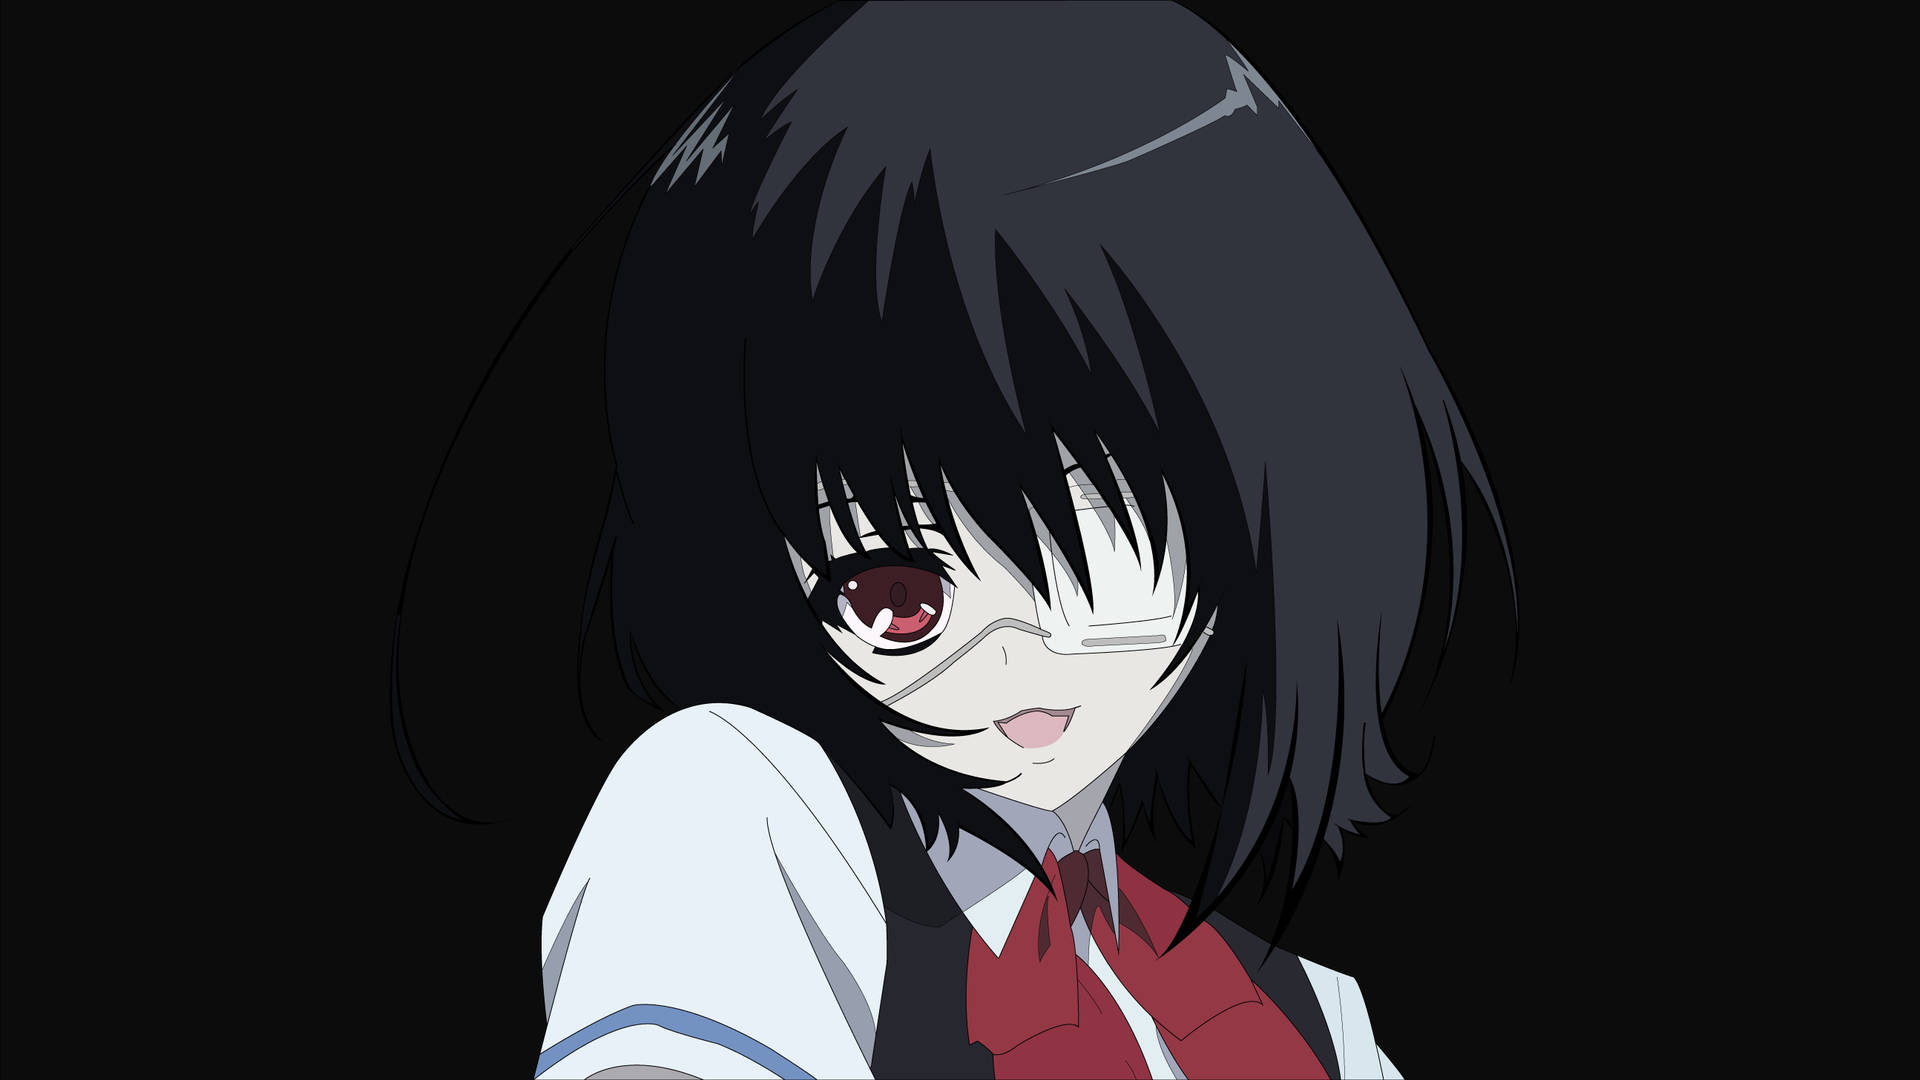 Another The Girl With Red Eyes Background